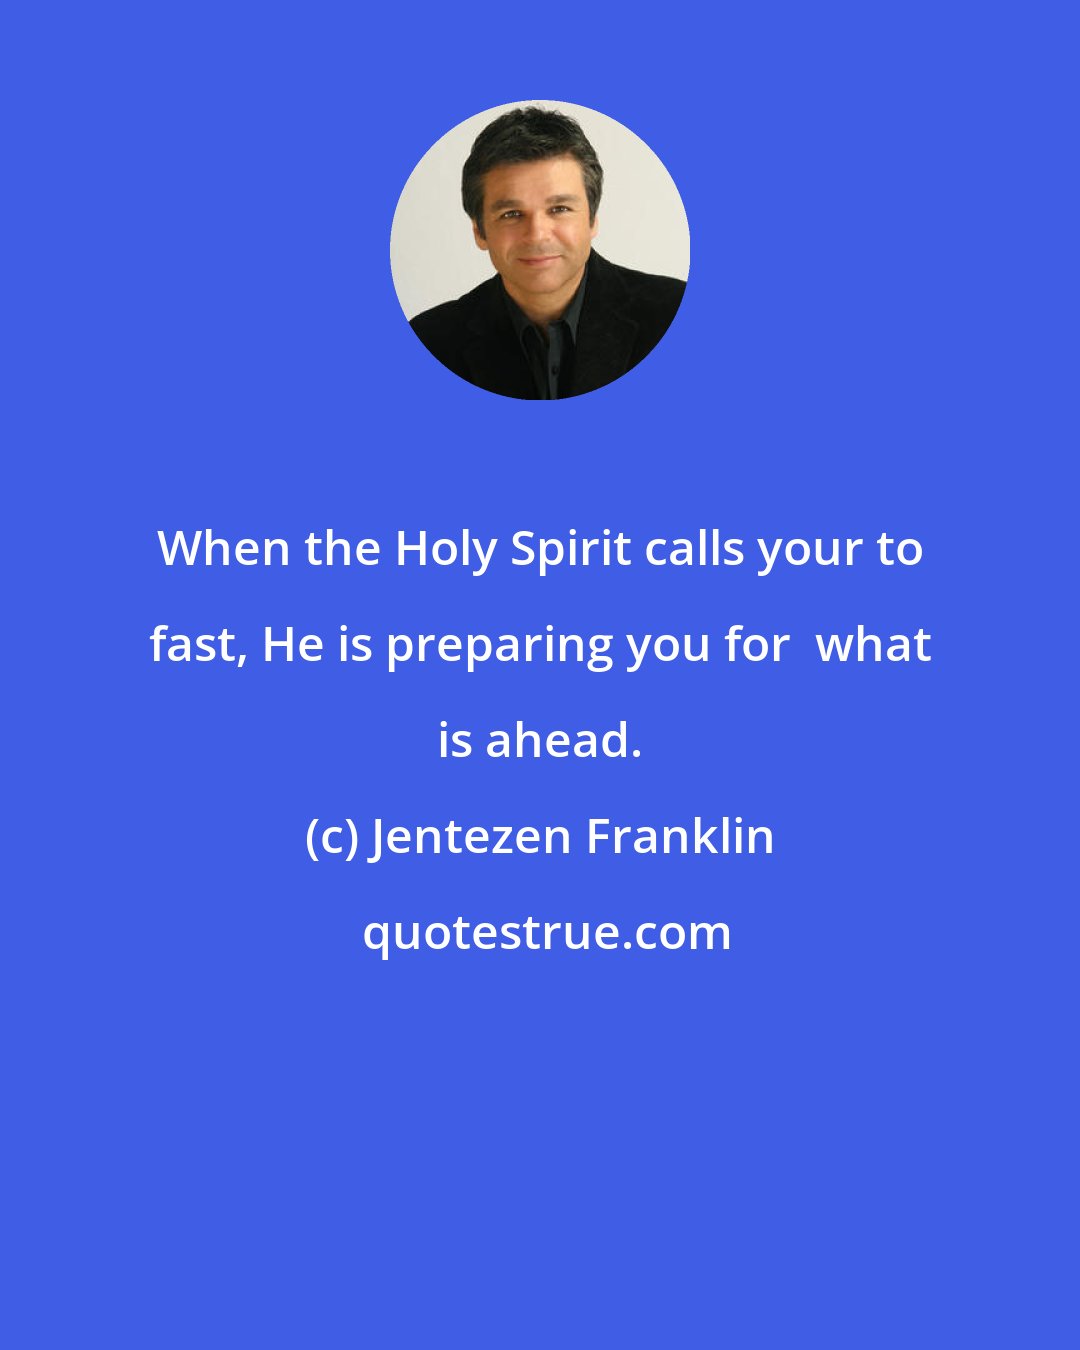 Jentezen Franklin: When the Holy Spirit calls your to fast, He is preparing you for  what is ahead.